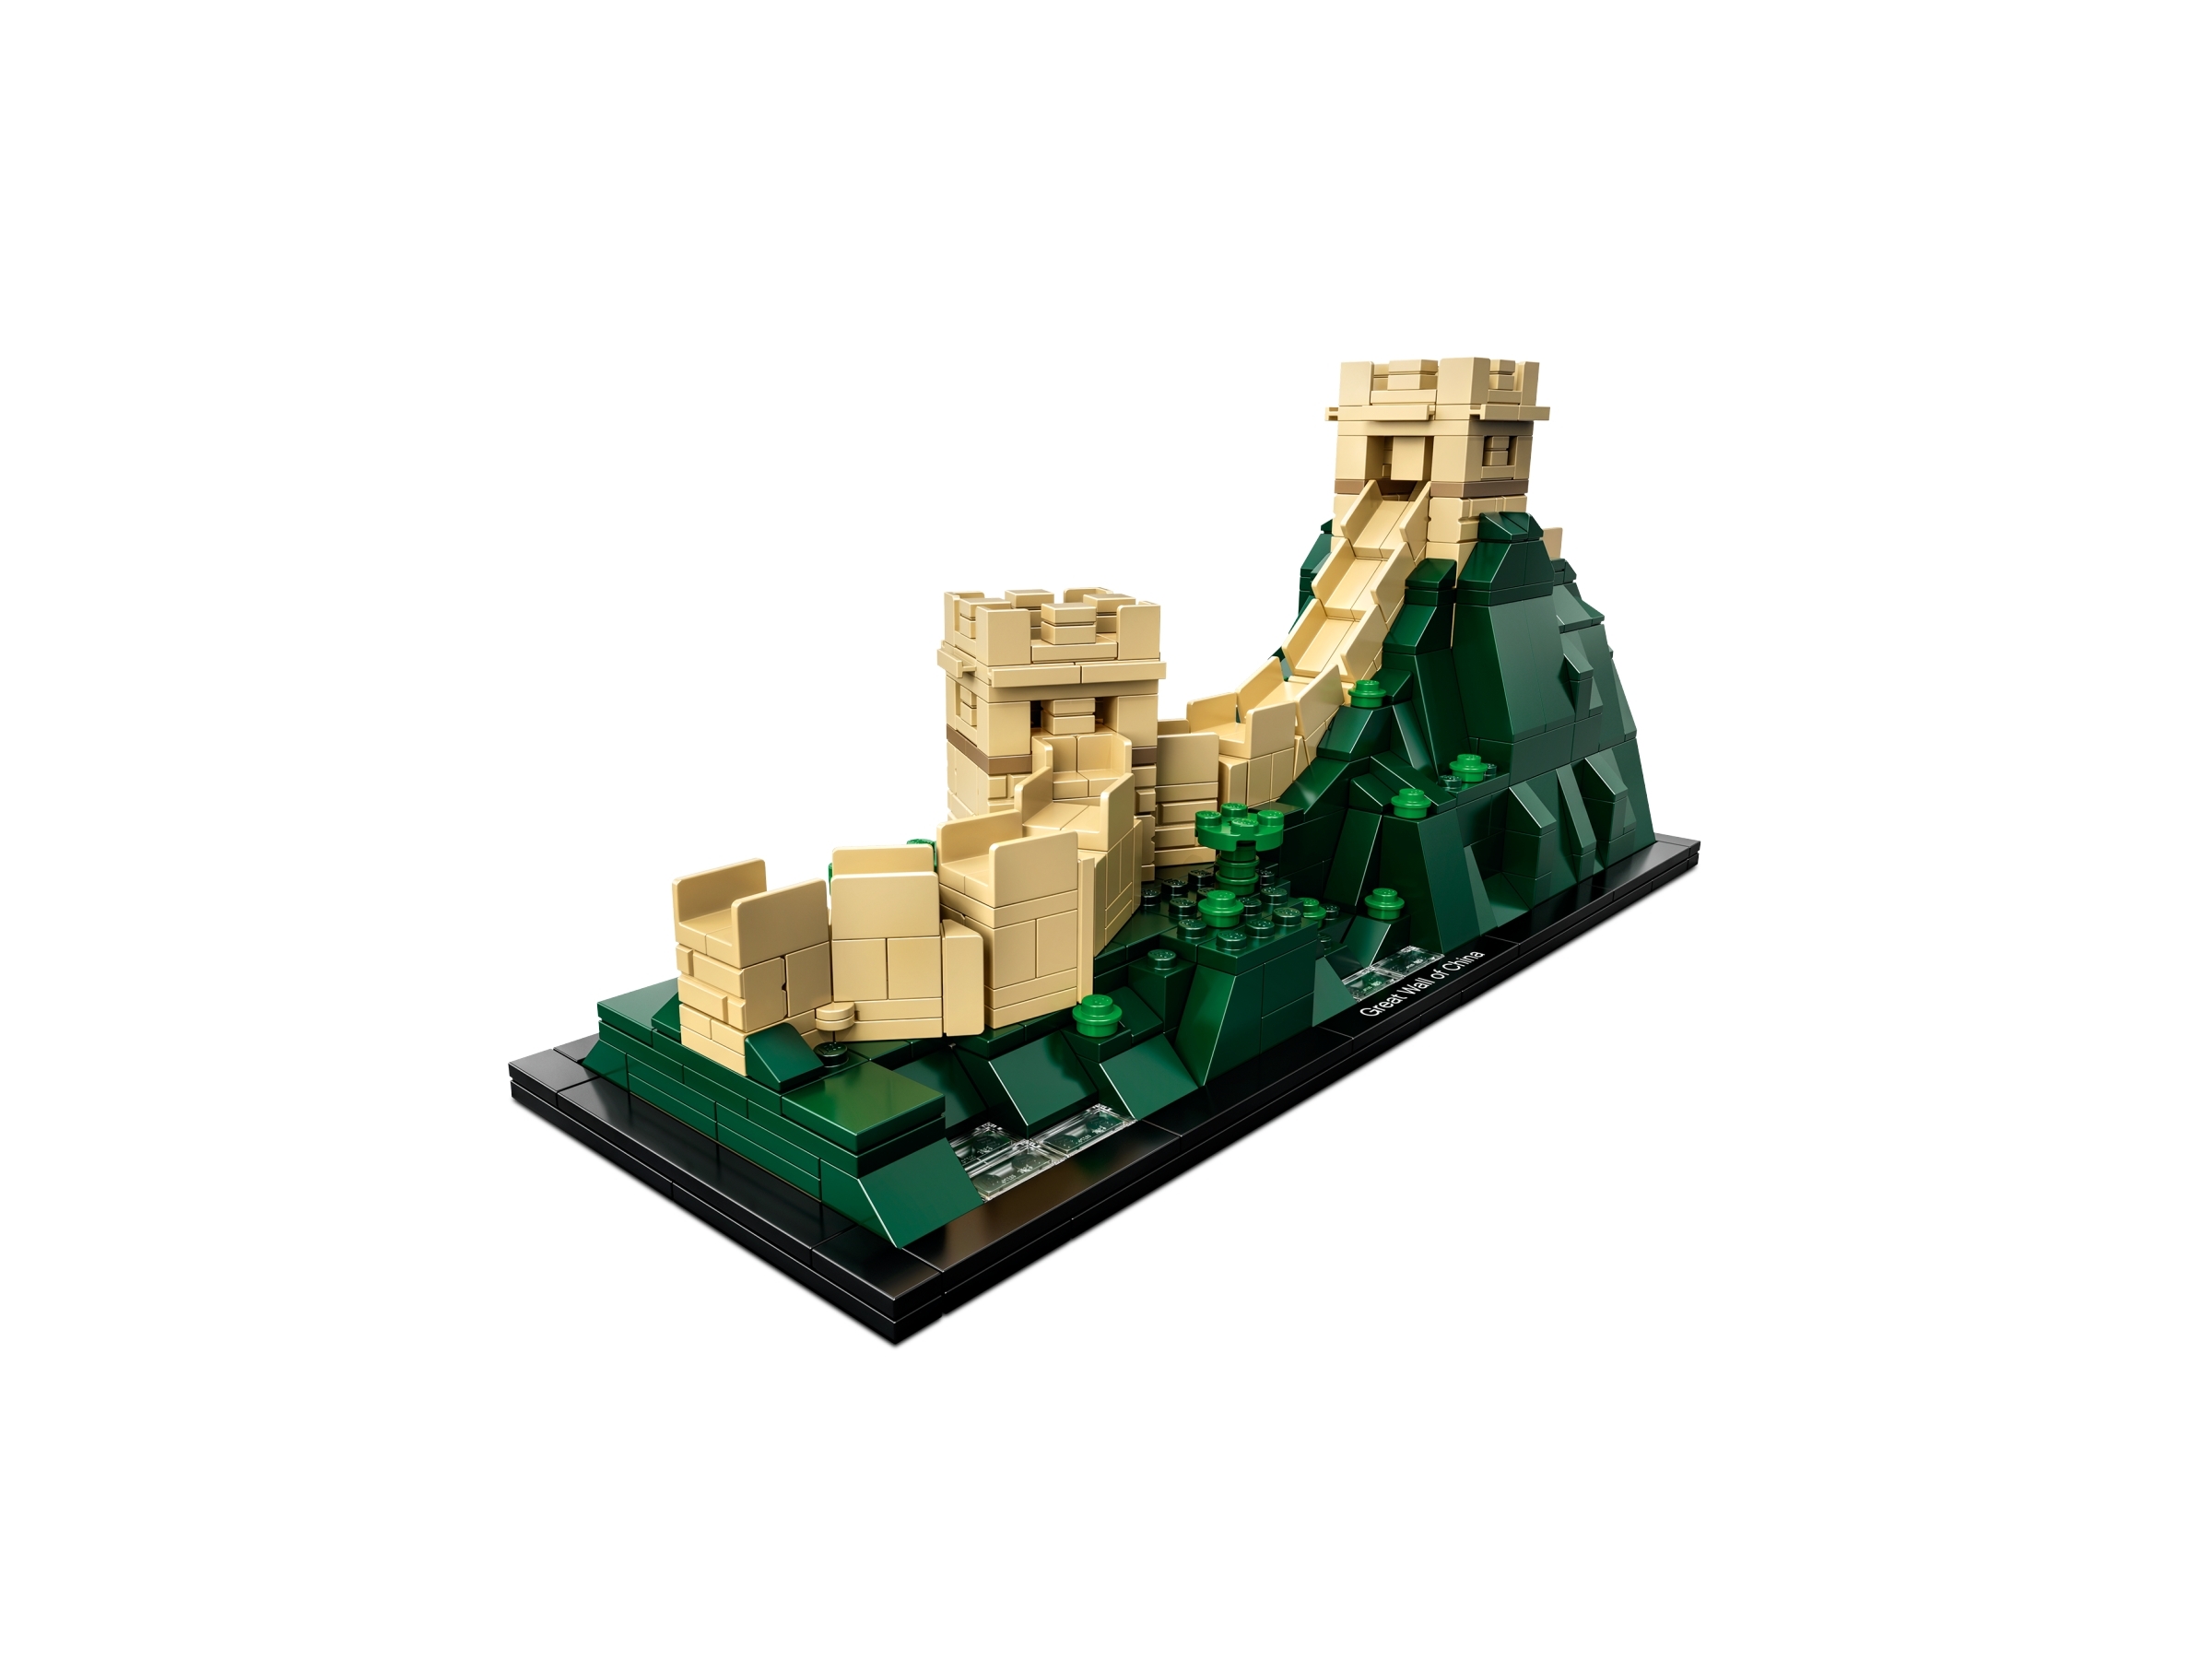 lego the great wall